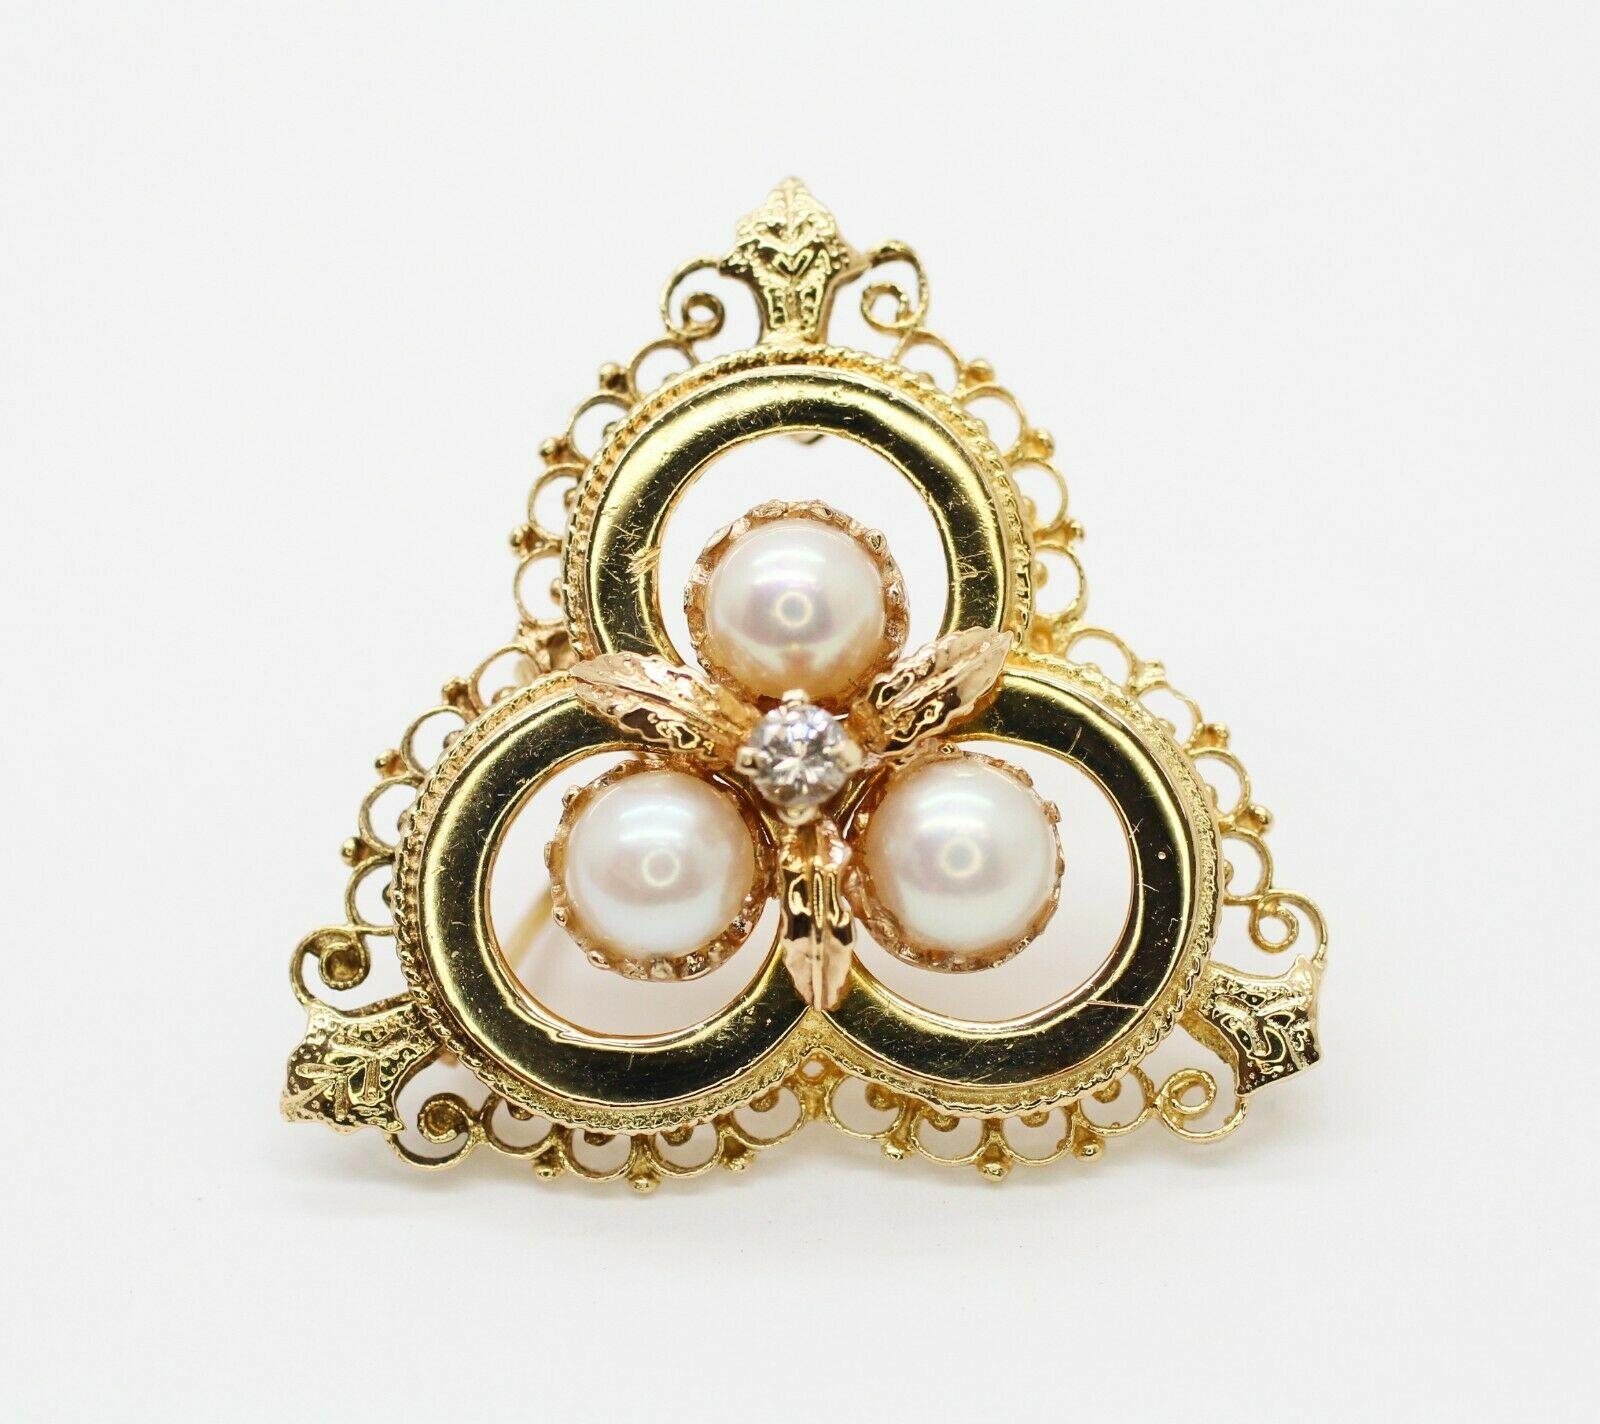     This ANTIQUE 14k yellow gold  brooch with pearls and diamonds in the center can used as pendant also.  
Specifications:
    type: BROOCH/pendant
    metal: 14K yellow gold
    CENTER STONE: 3 PIECES PEARL AND 1 DIAMOND
    LENGTH: 4 cm
   